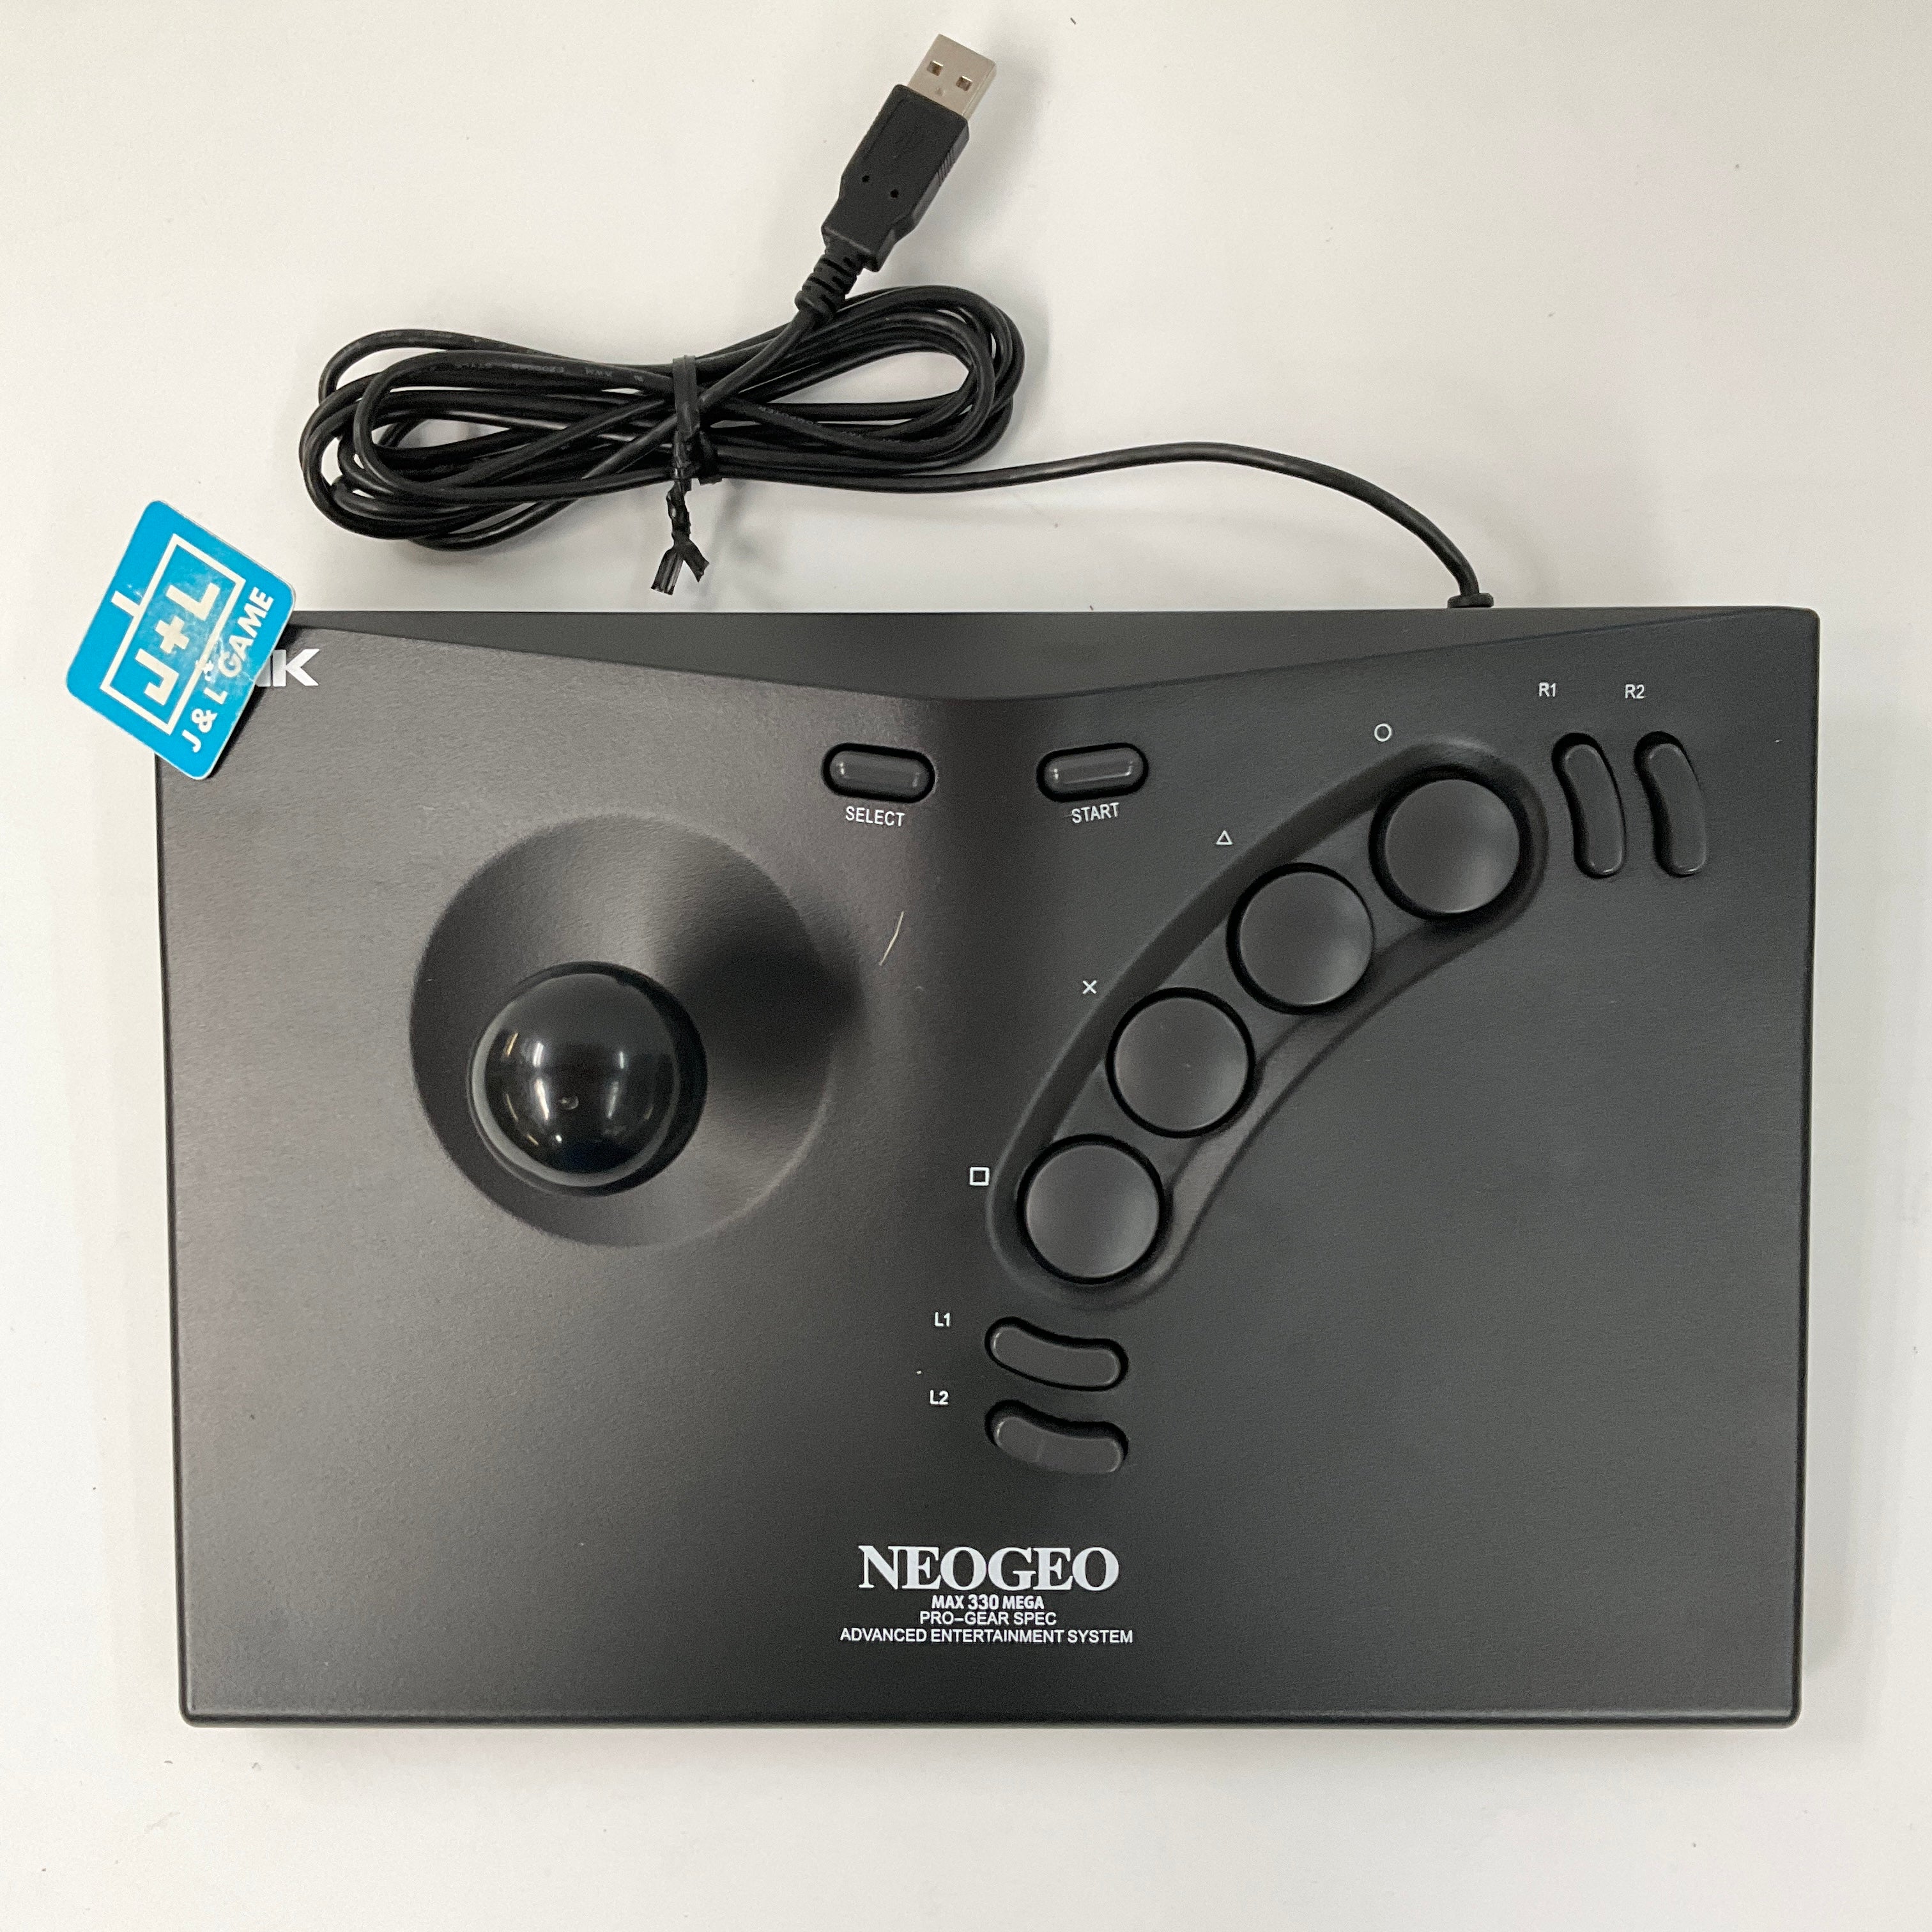 PlayStation 3 Neo Geo Stick 2 USB Controller - (PS3) PlayStation 3 [Pre-Owned] (Japanese Import) Accessories エクサー   